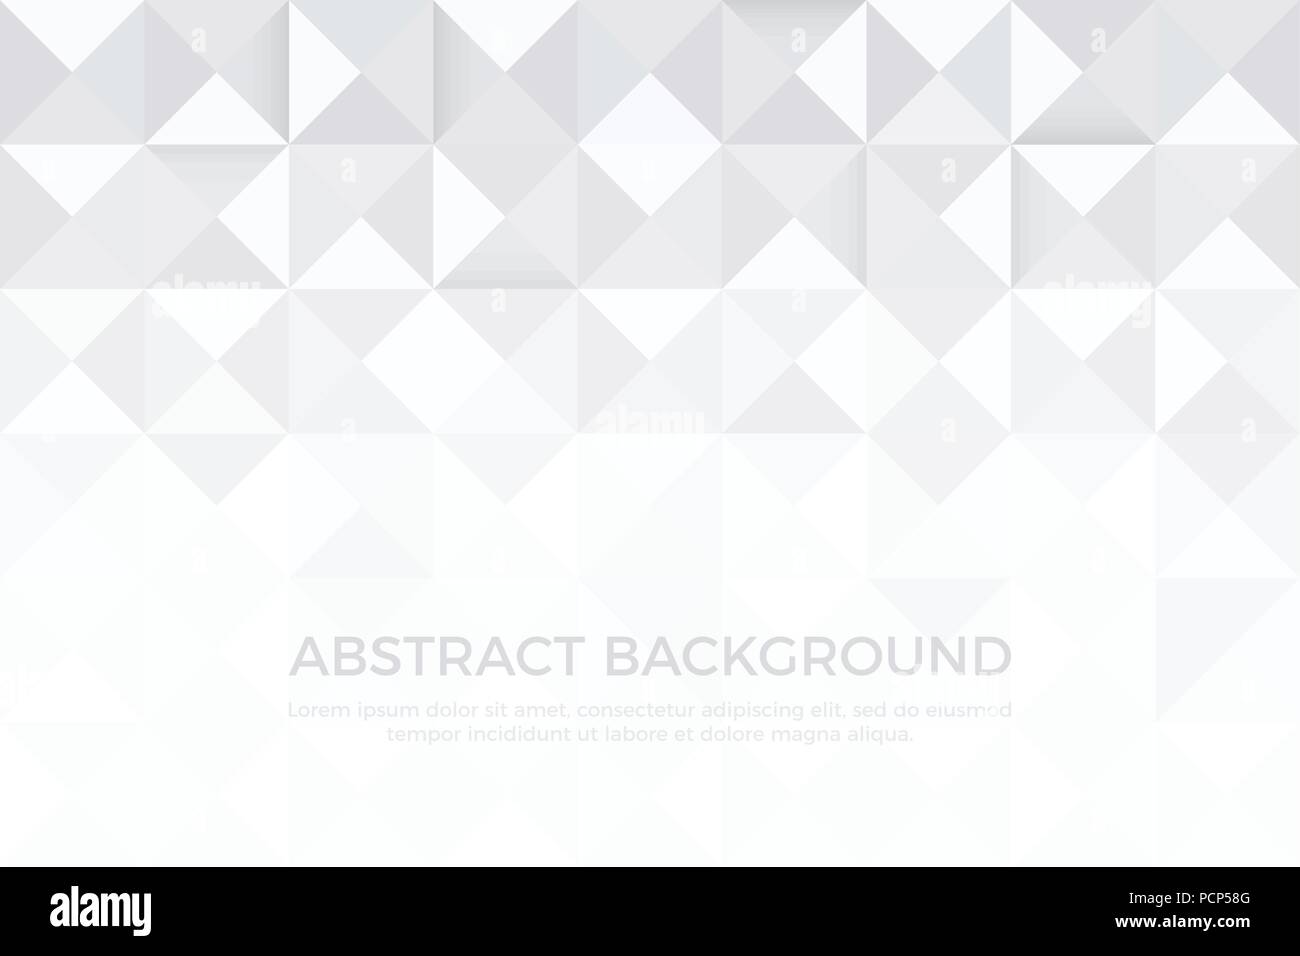 Gray color and white color background abstract art Stock Vector